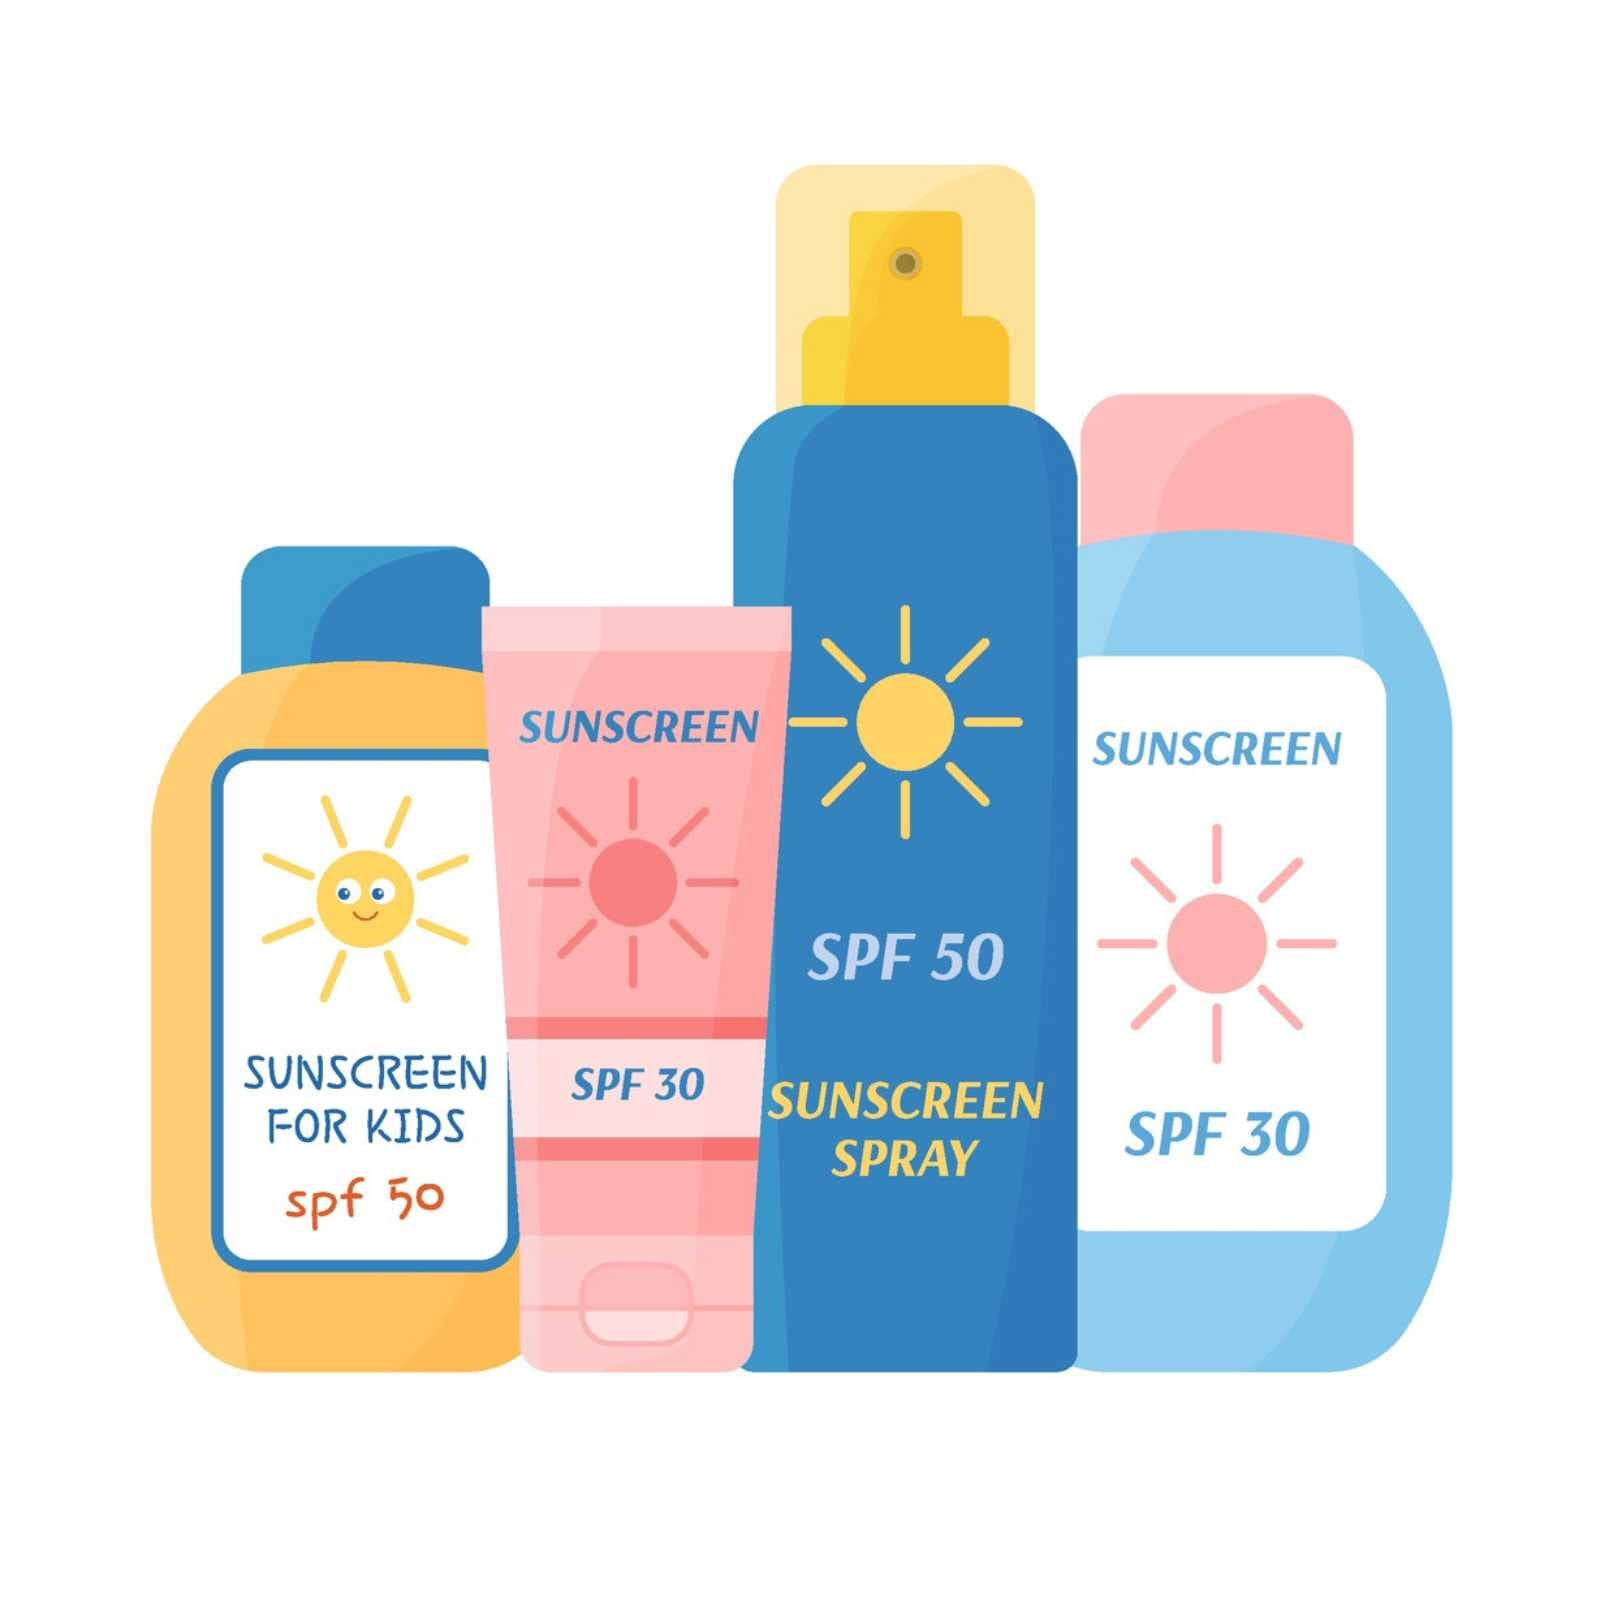 drawing of sunscreen bottles